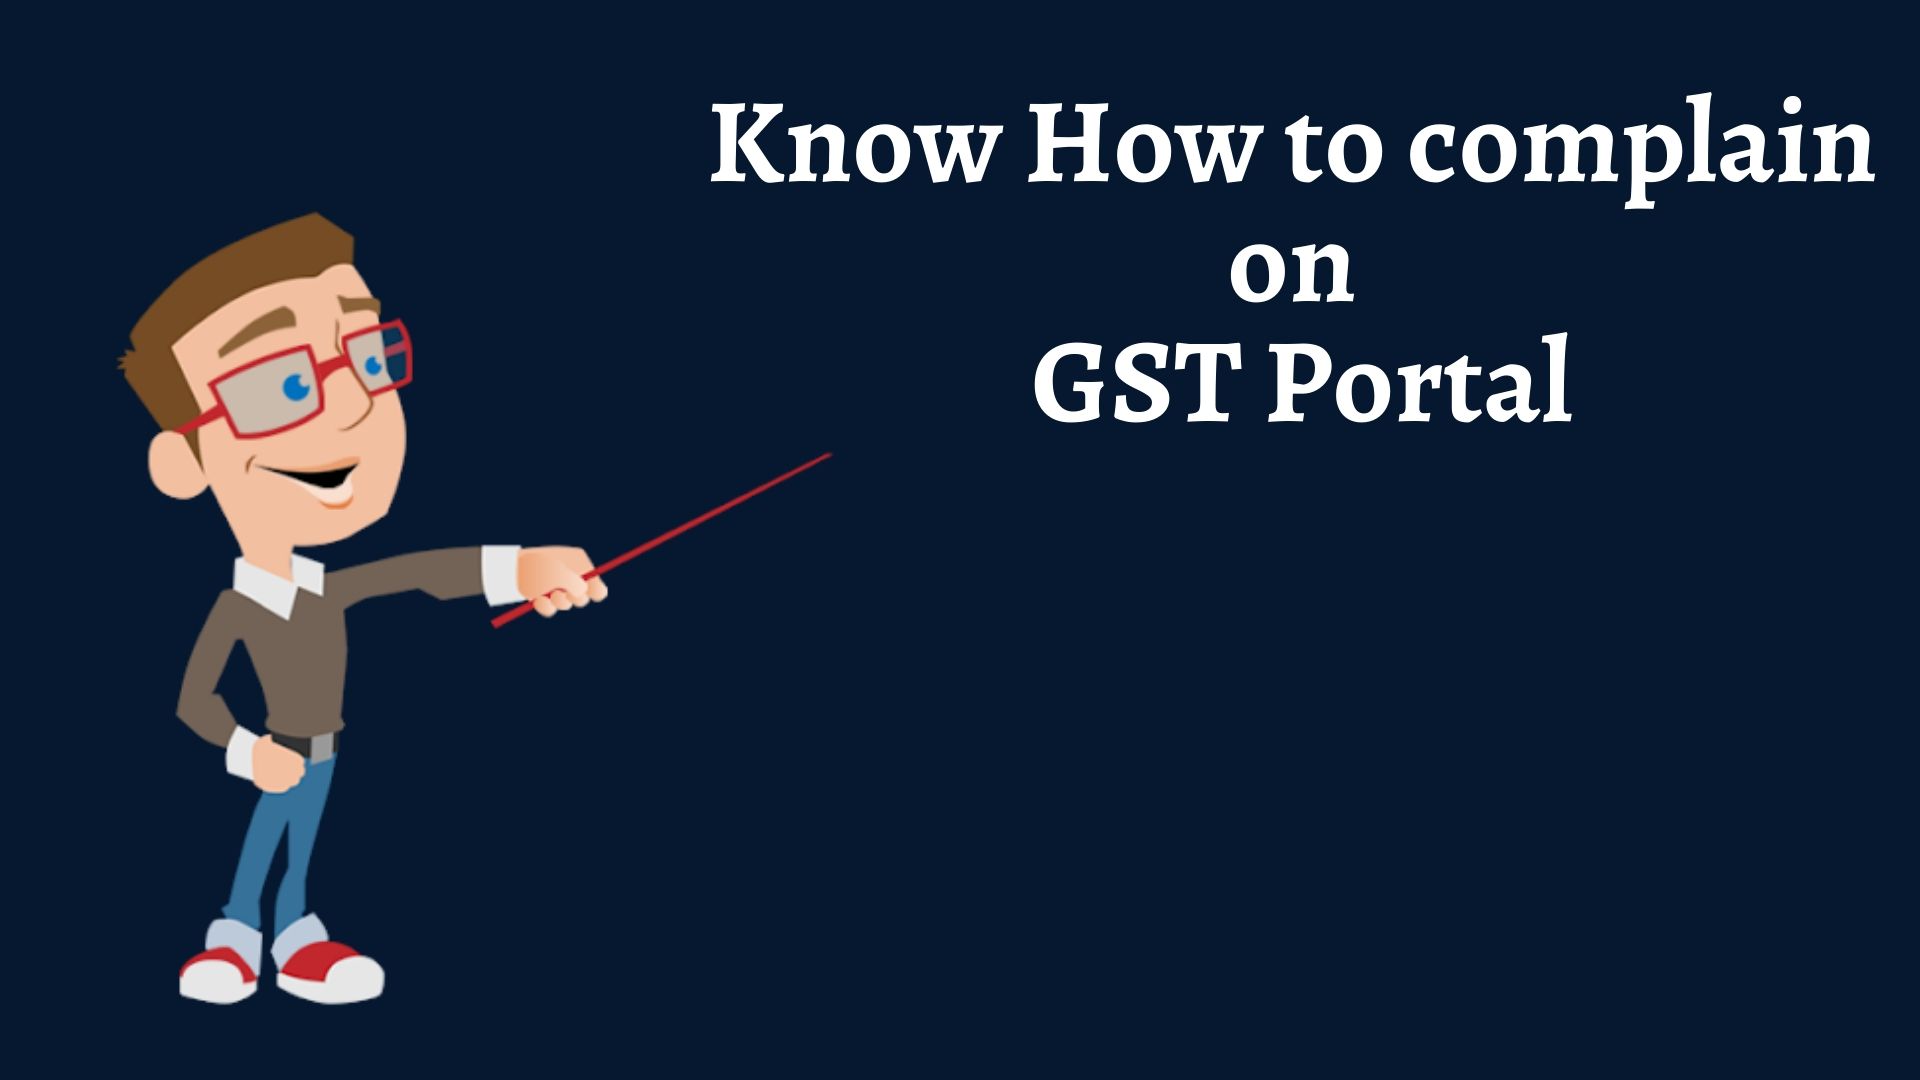 Know how to complain on GST Portal